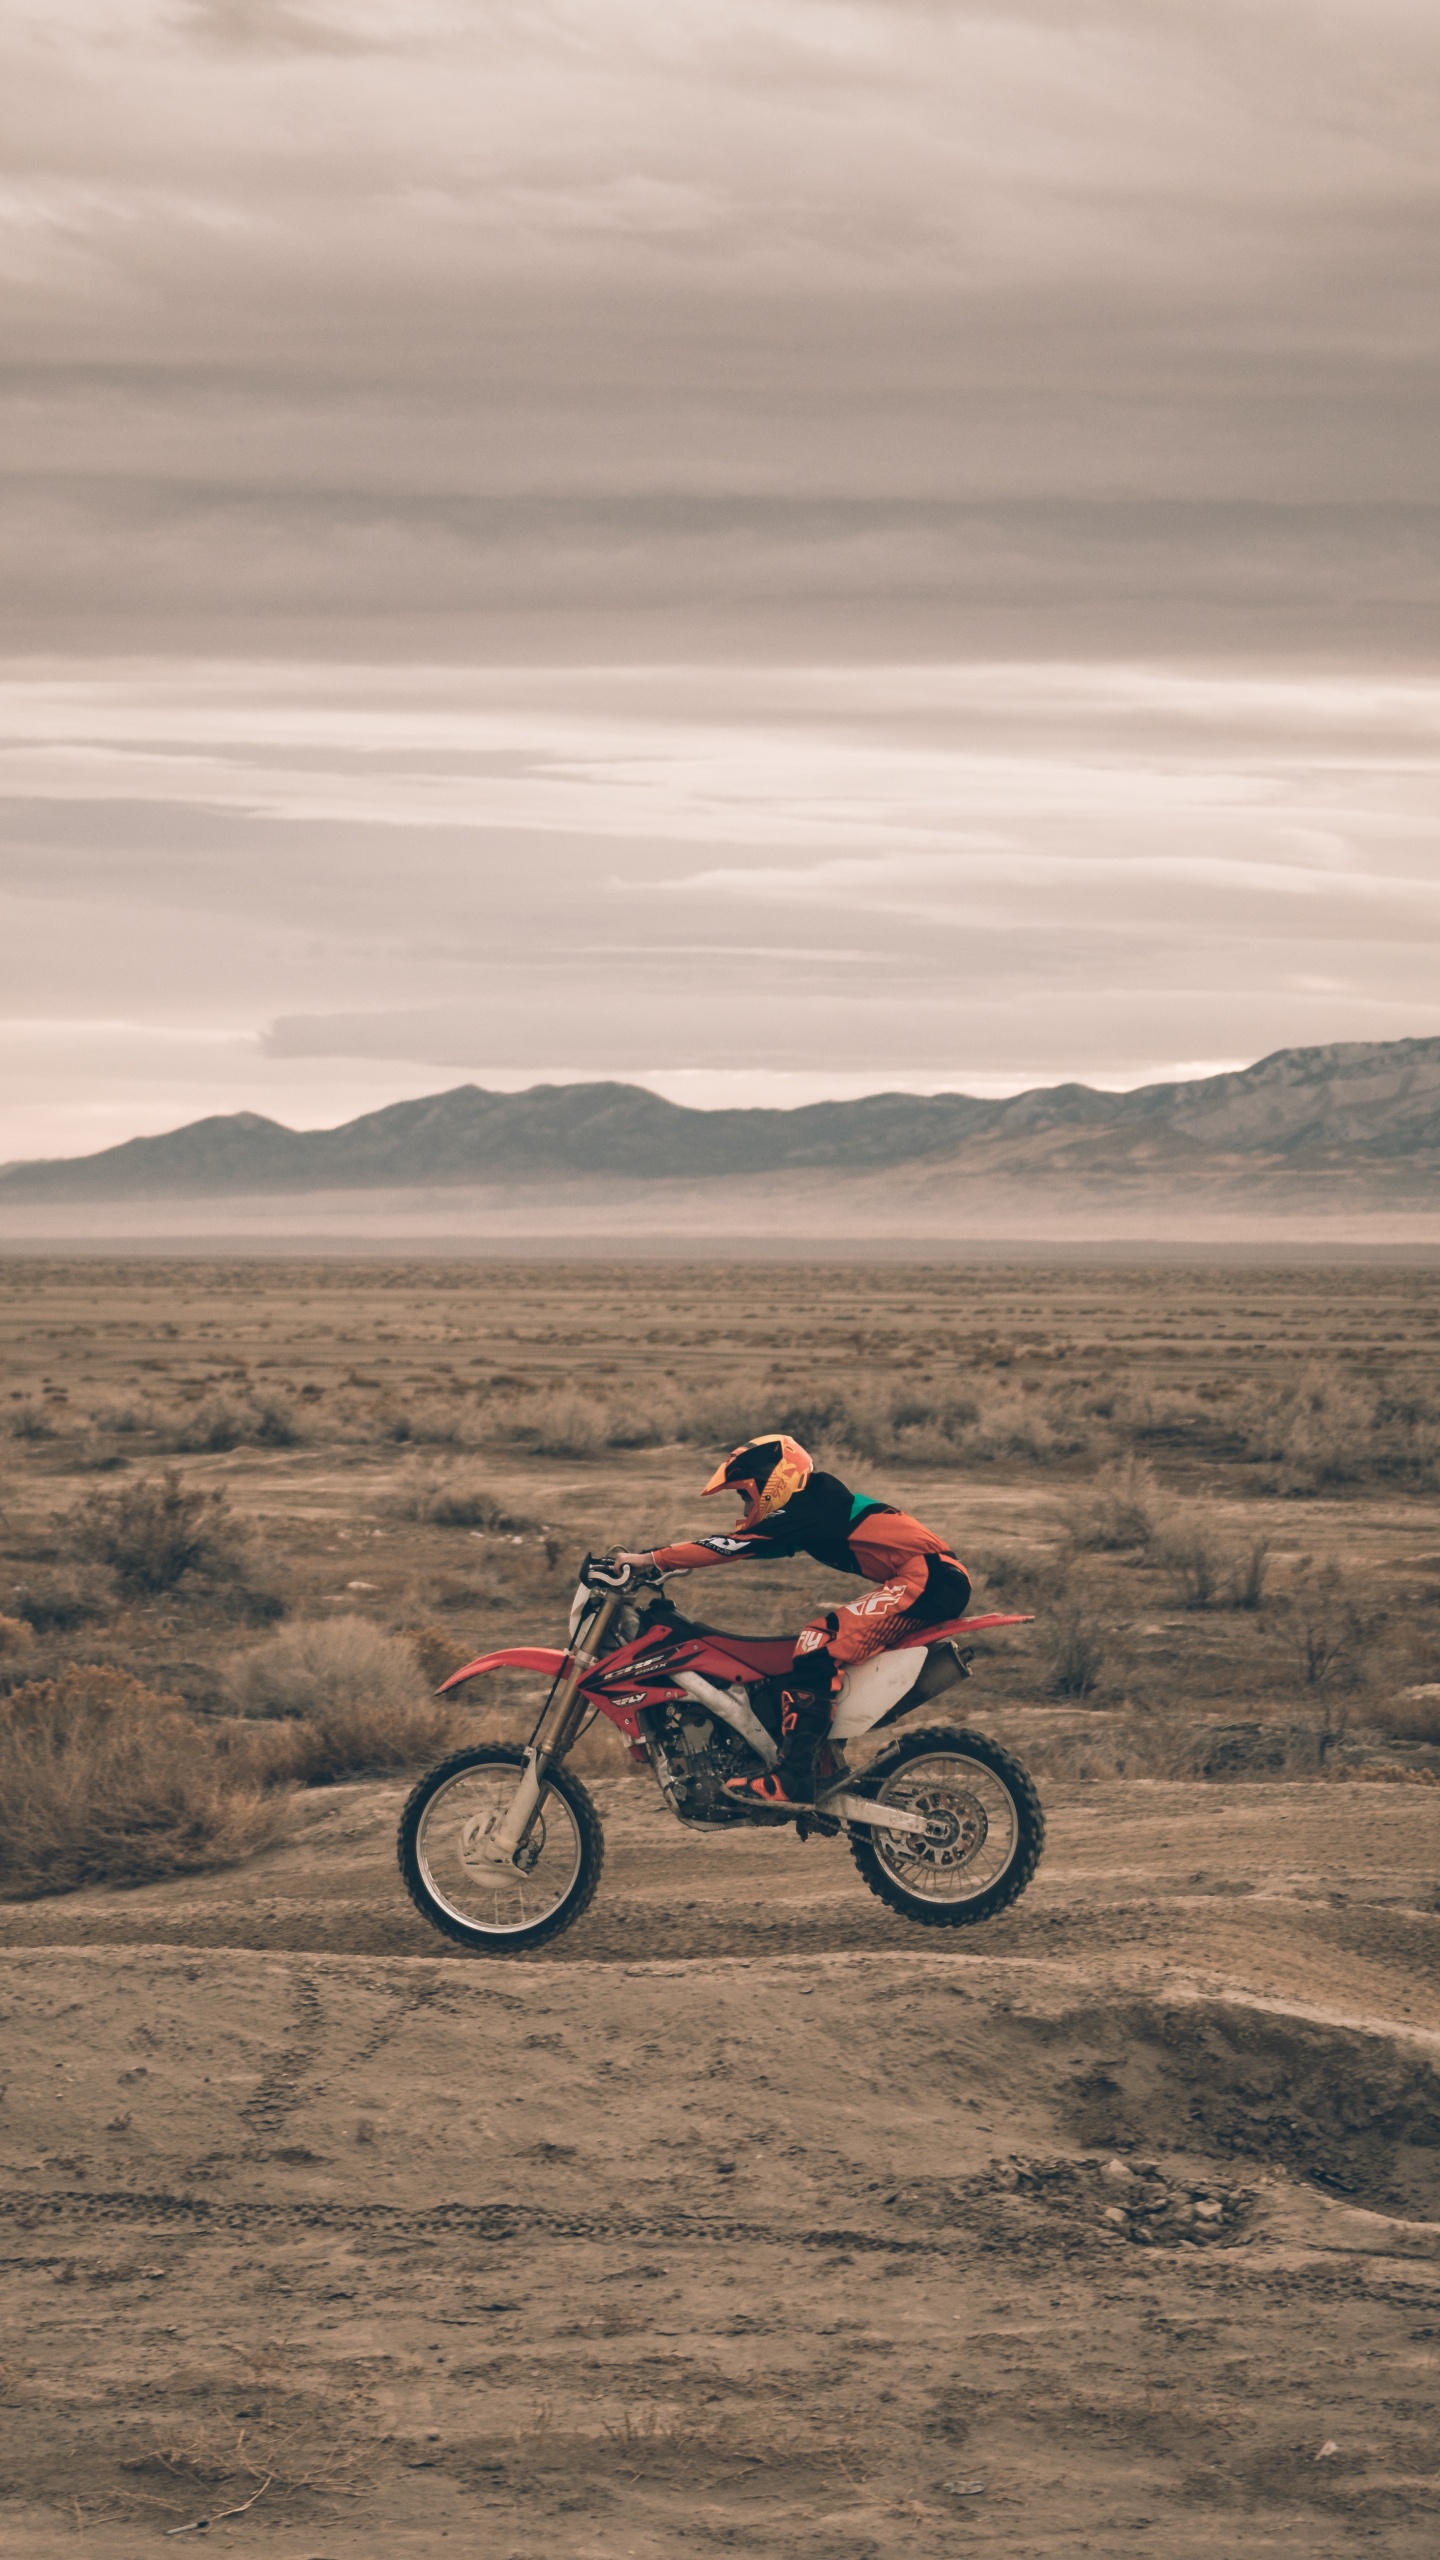 Man in Red Jacket Riding on Red Motorcycle on Brown Field During Daytime. Wallpaper in 1440x2560 Resolution